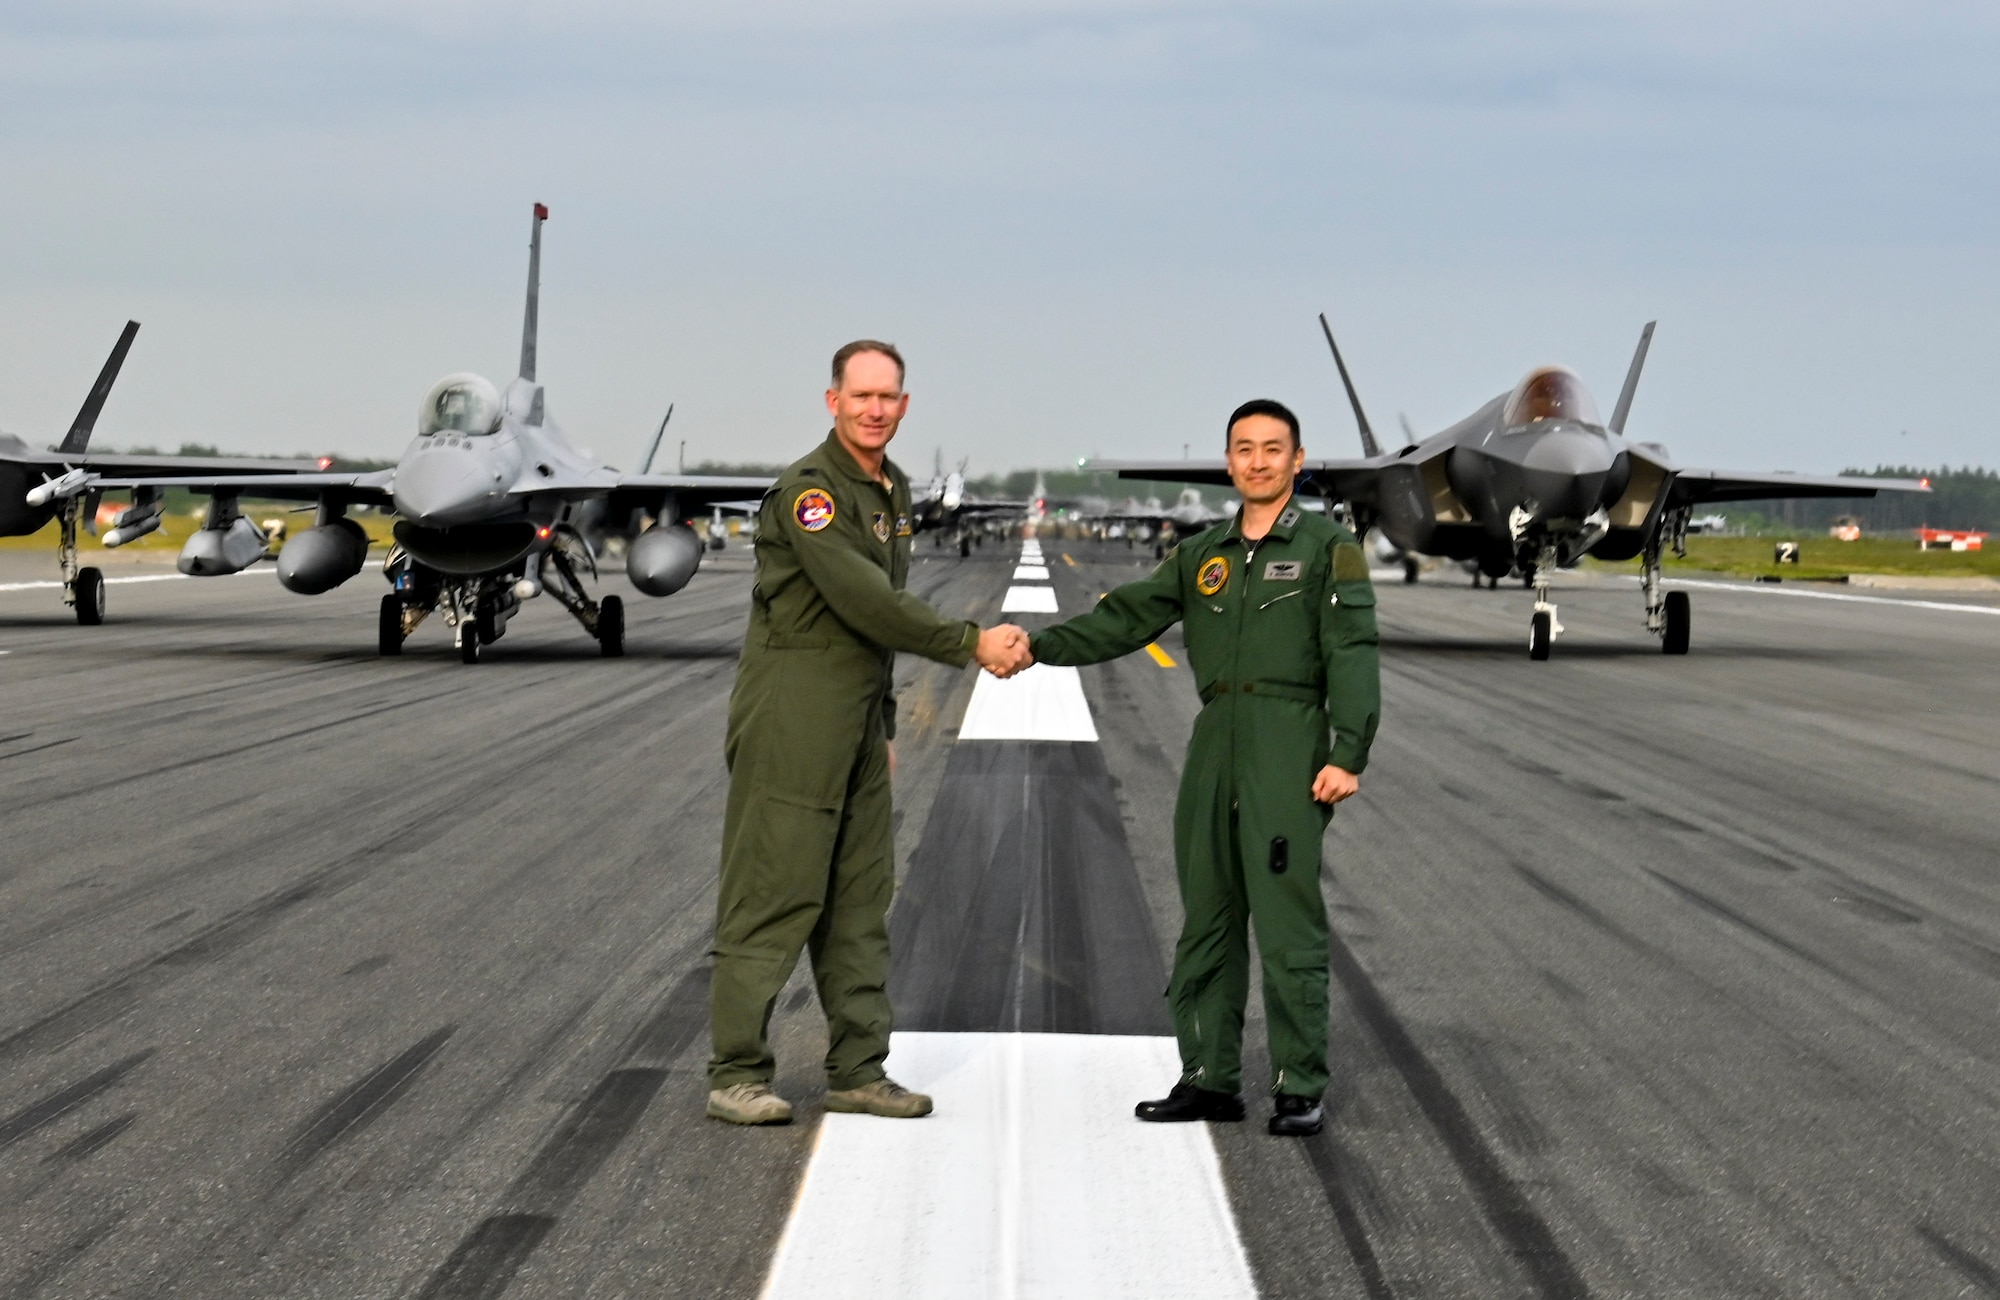 U.S. Air Force Col Kristopher Struve, left, 35th Fighter Wing commander, and Japan Air Self-Defense Force Maj. Gen. Takahiro Kubota, 3rd Air Wing and JASDF Misawa Air Base commander, shake hands in front of aircraft participating in an "Elephant Walk" at Misawa Air Base, June 22, 2020. Twelve U.S. Air Force F-16CM Fighting Falcons, 12 Koku-Jieitai F-35A Lightning II Joint Strike Fighters, two U.S. Navy EA-18G Growlers, a USN C-12 Huron, two USAF MC-130J Commando II aircraft, and a USN P-8 Poseidon participated in the Elephant Walk, which showcased Misawa Air Base’s collective readiness and ability to generate combat airpower at a moment's notice to ensure regional stability throughout the Indo-Pacific. This is Misawa Air Base’s first time hosting a bilateral and joint Elephant Walk. (U.S. Air Force photo by Tech. Sgt. Timothy Moore)